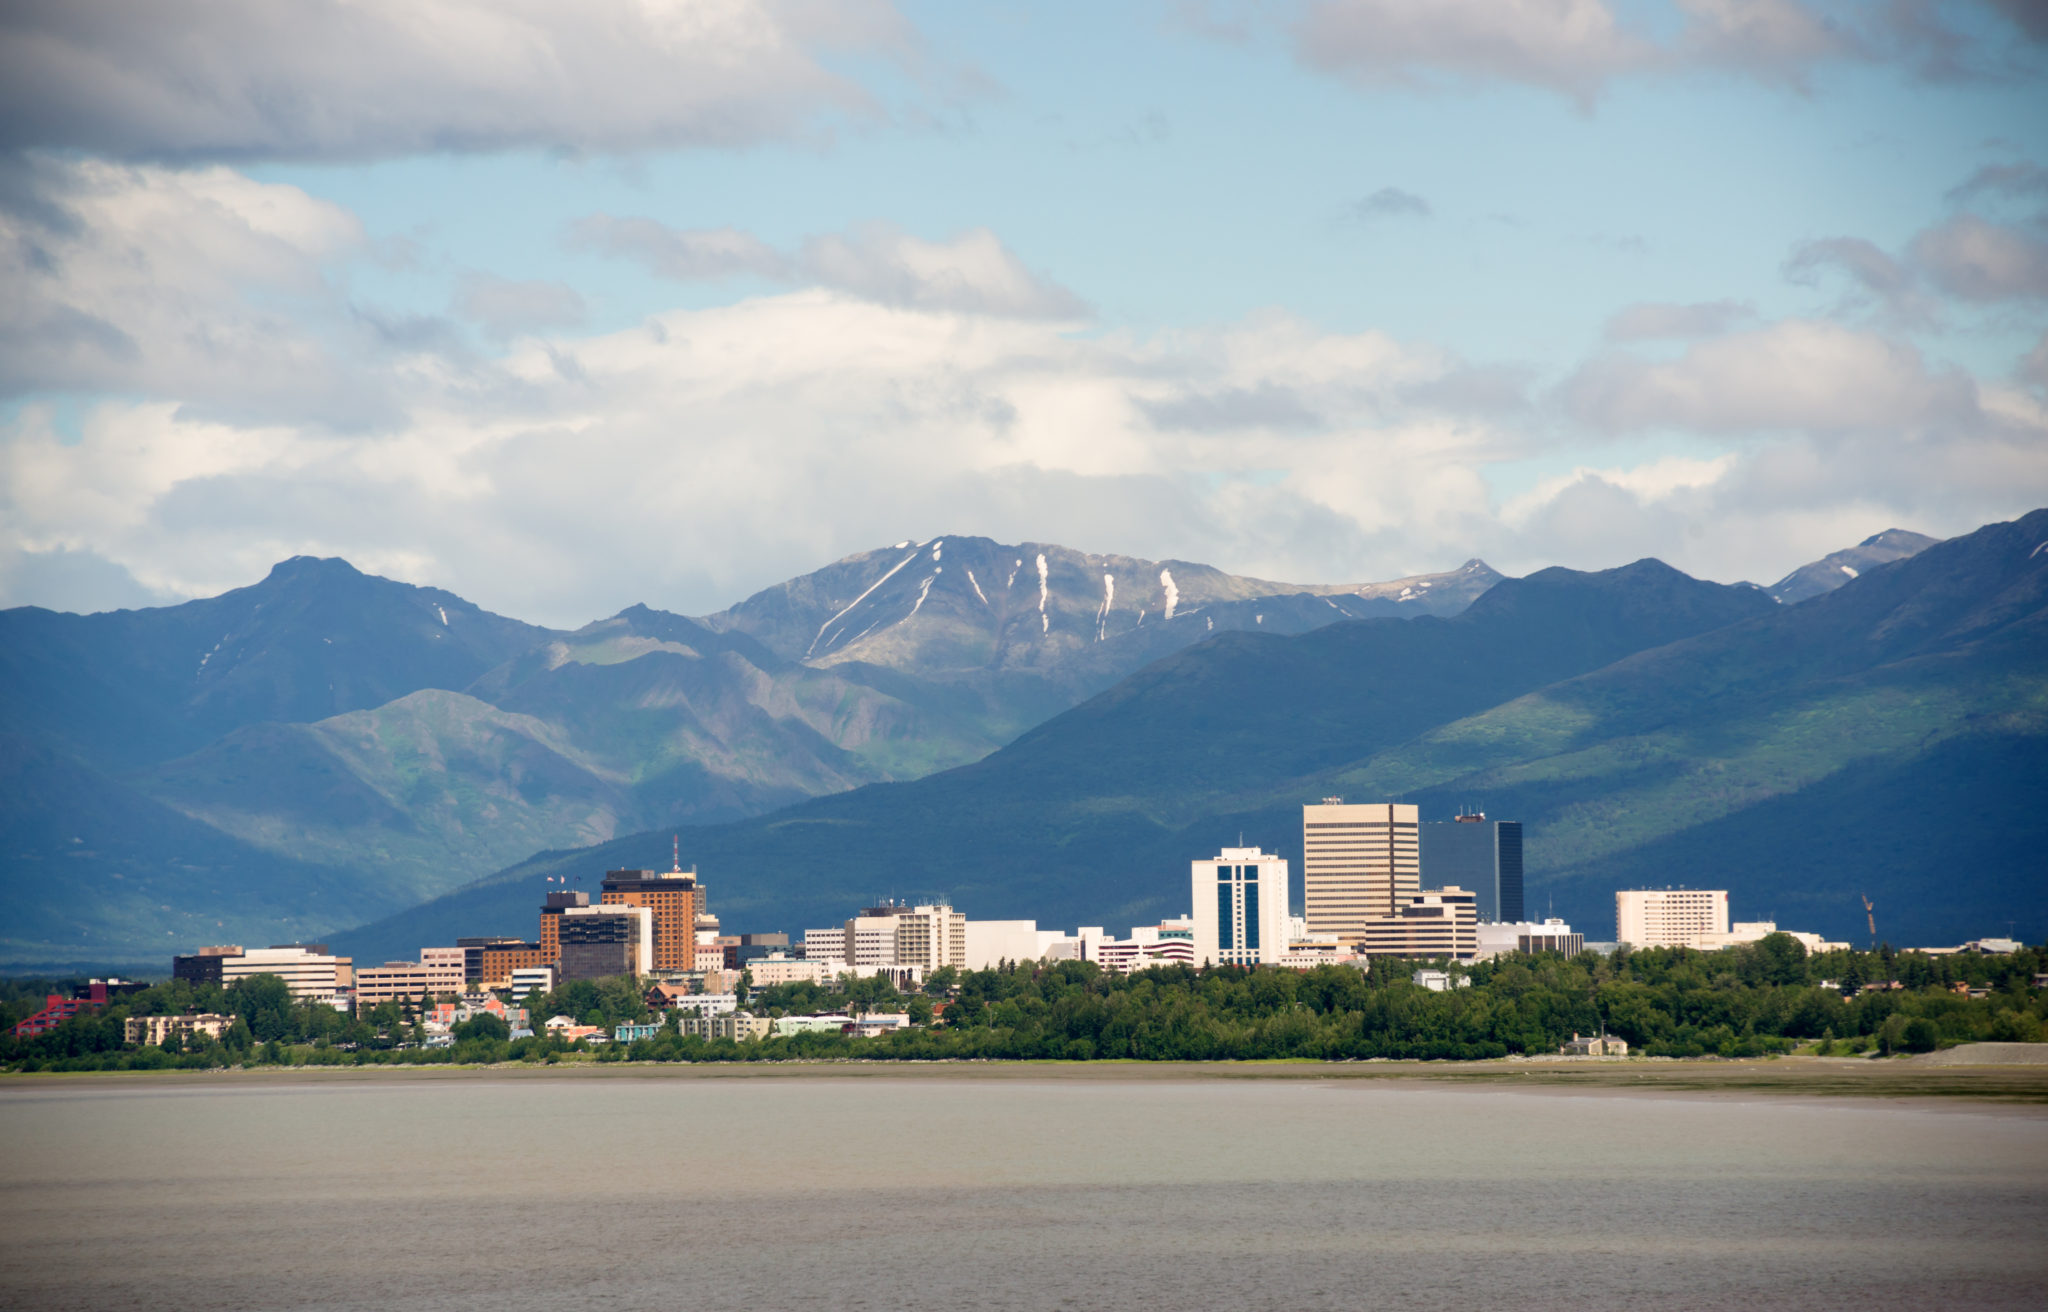 Office Buildings City Skyline Downtown Anchorage Alaska United States